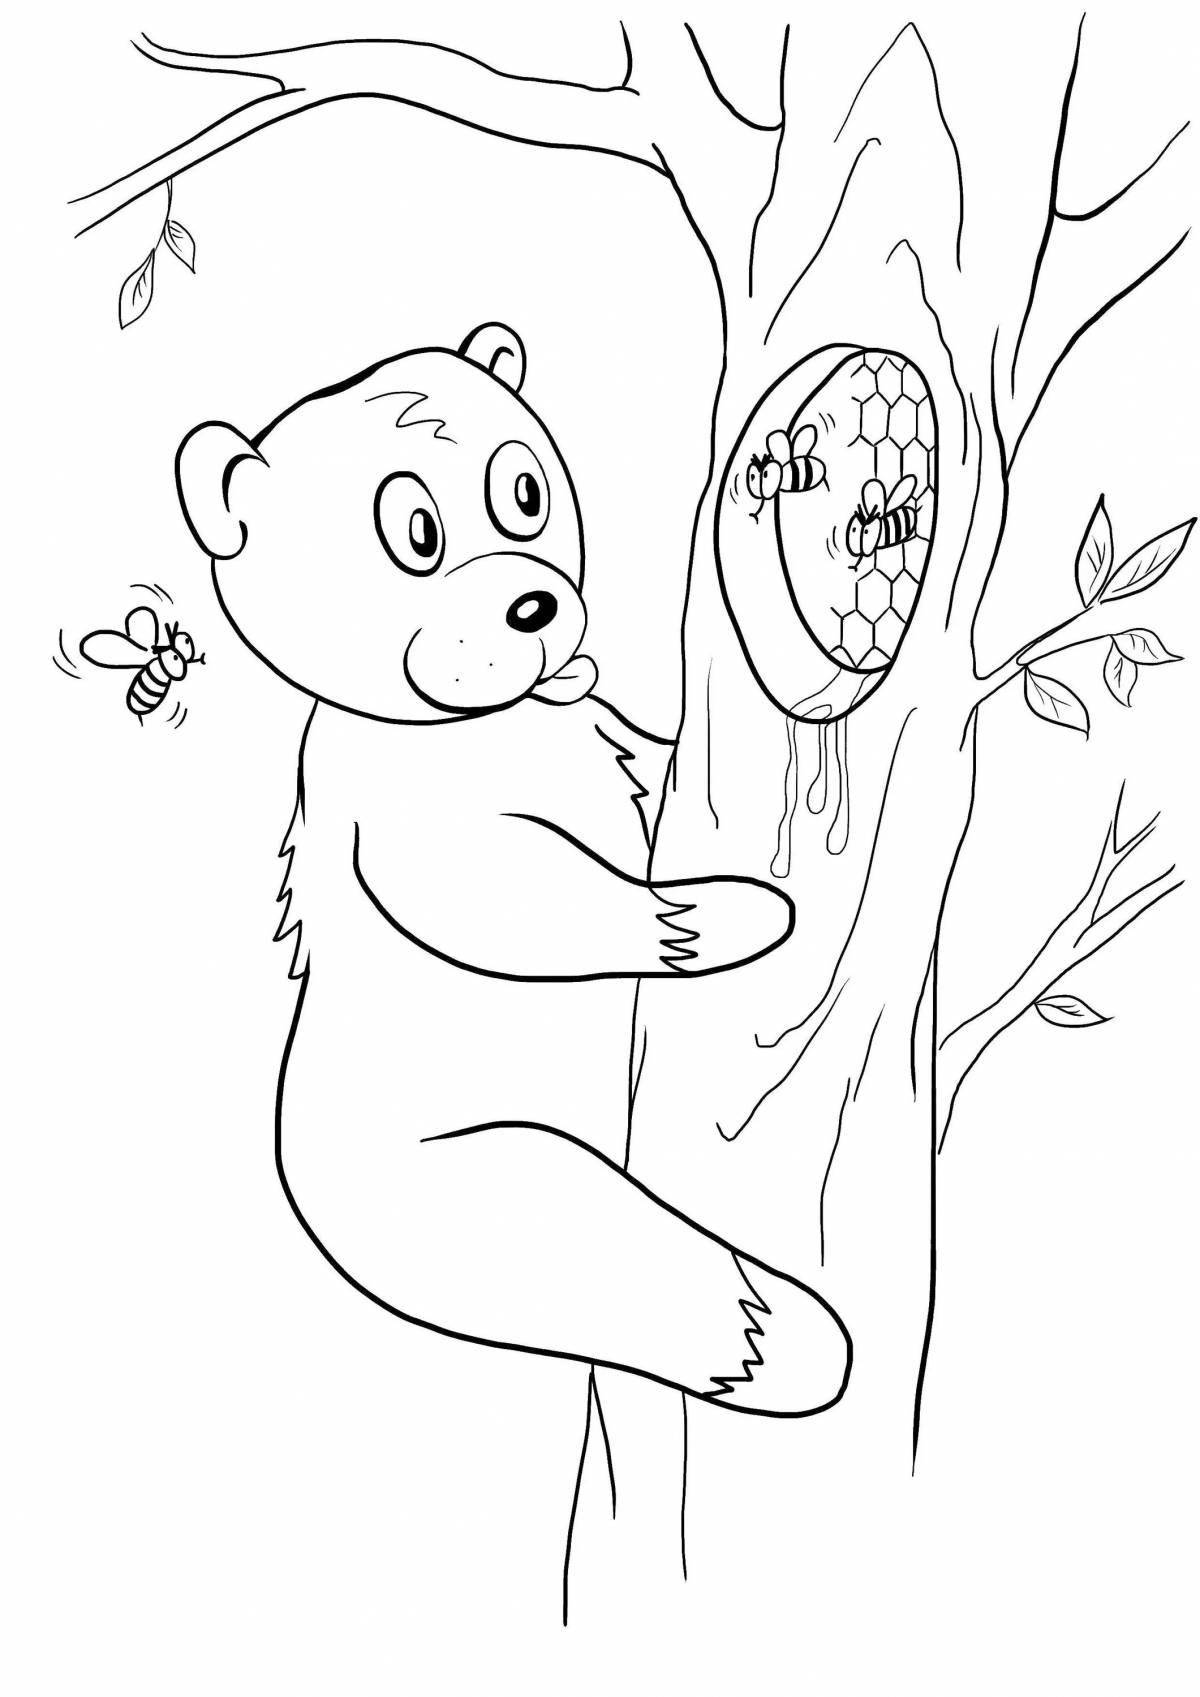 Coloring book bright bear in the forest